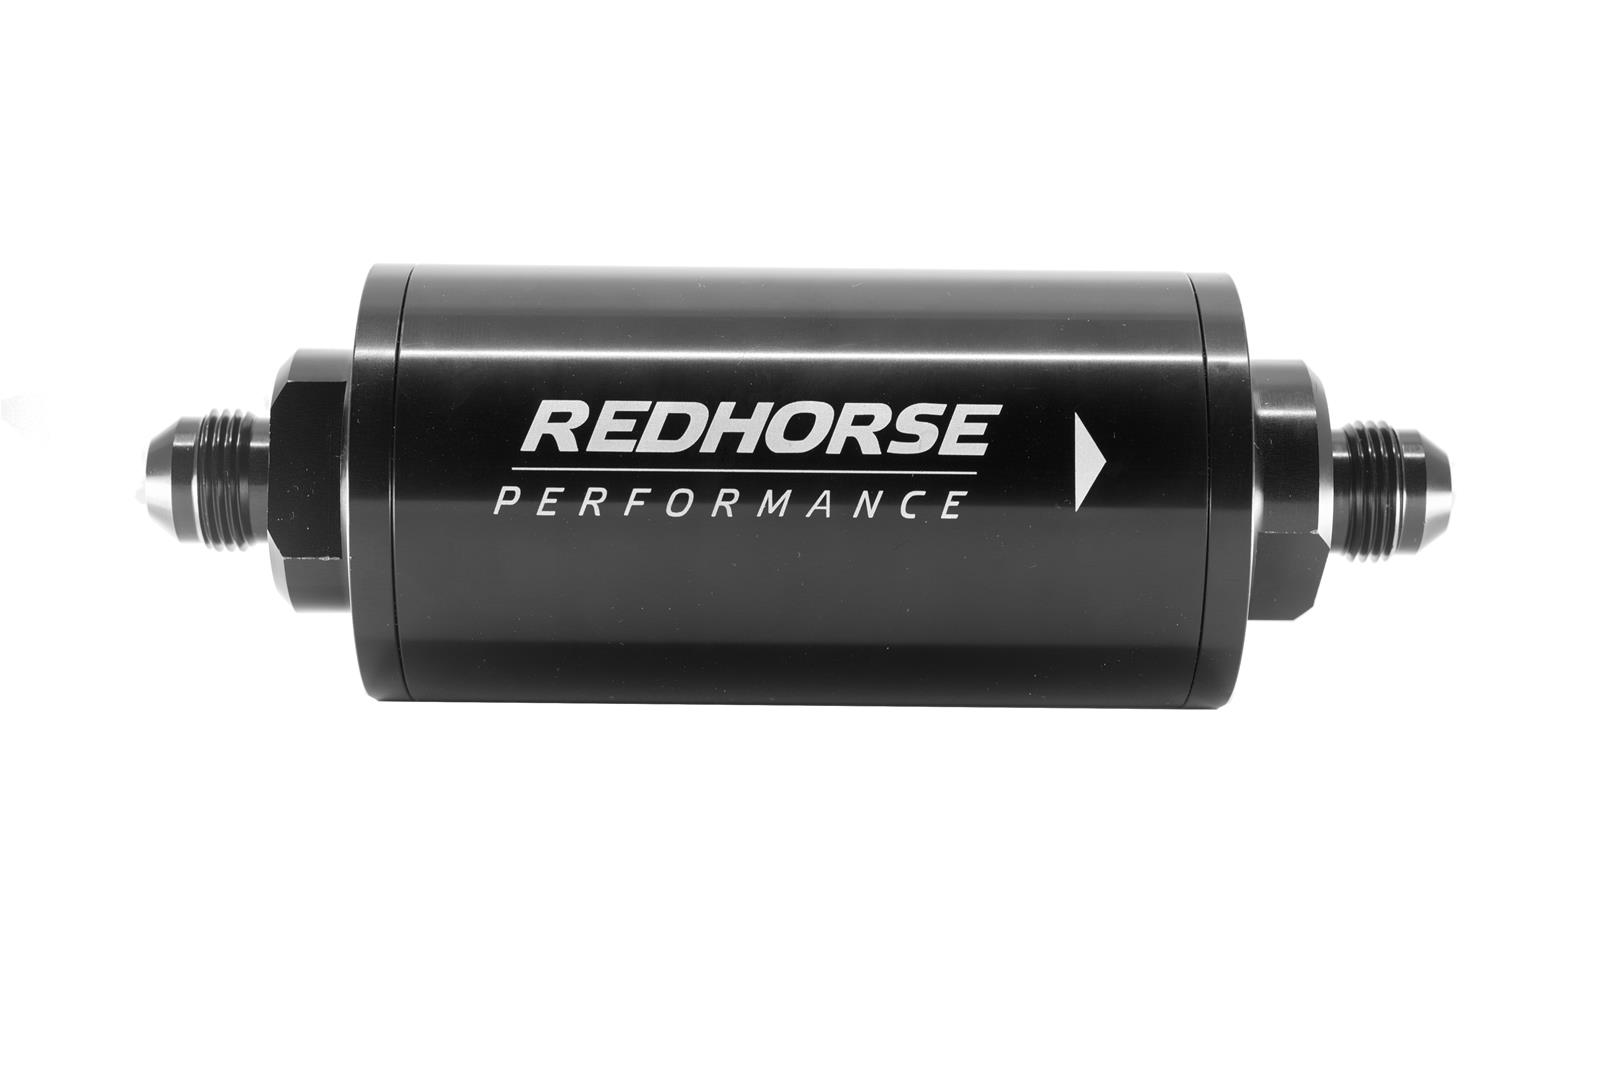 Redhorse Performance 4651-08-2-10 6in Cylindrical In-Line Race Fuel Filter w/ 10 Micron S.S. element - 08 AN